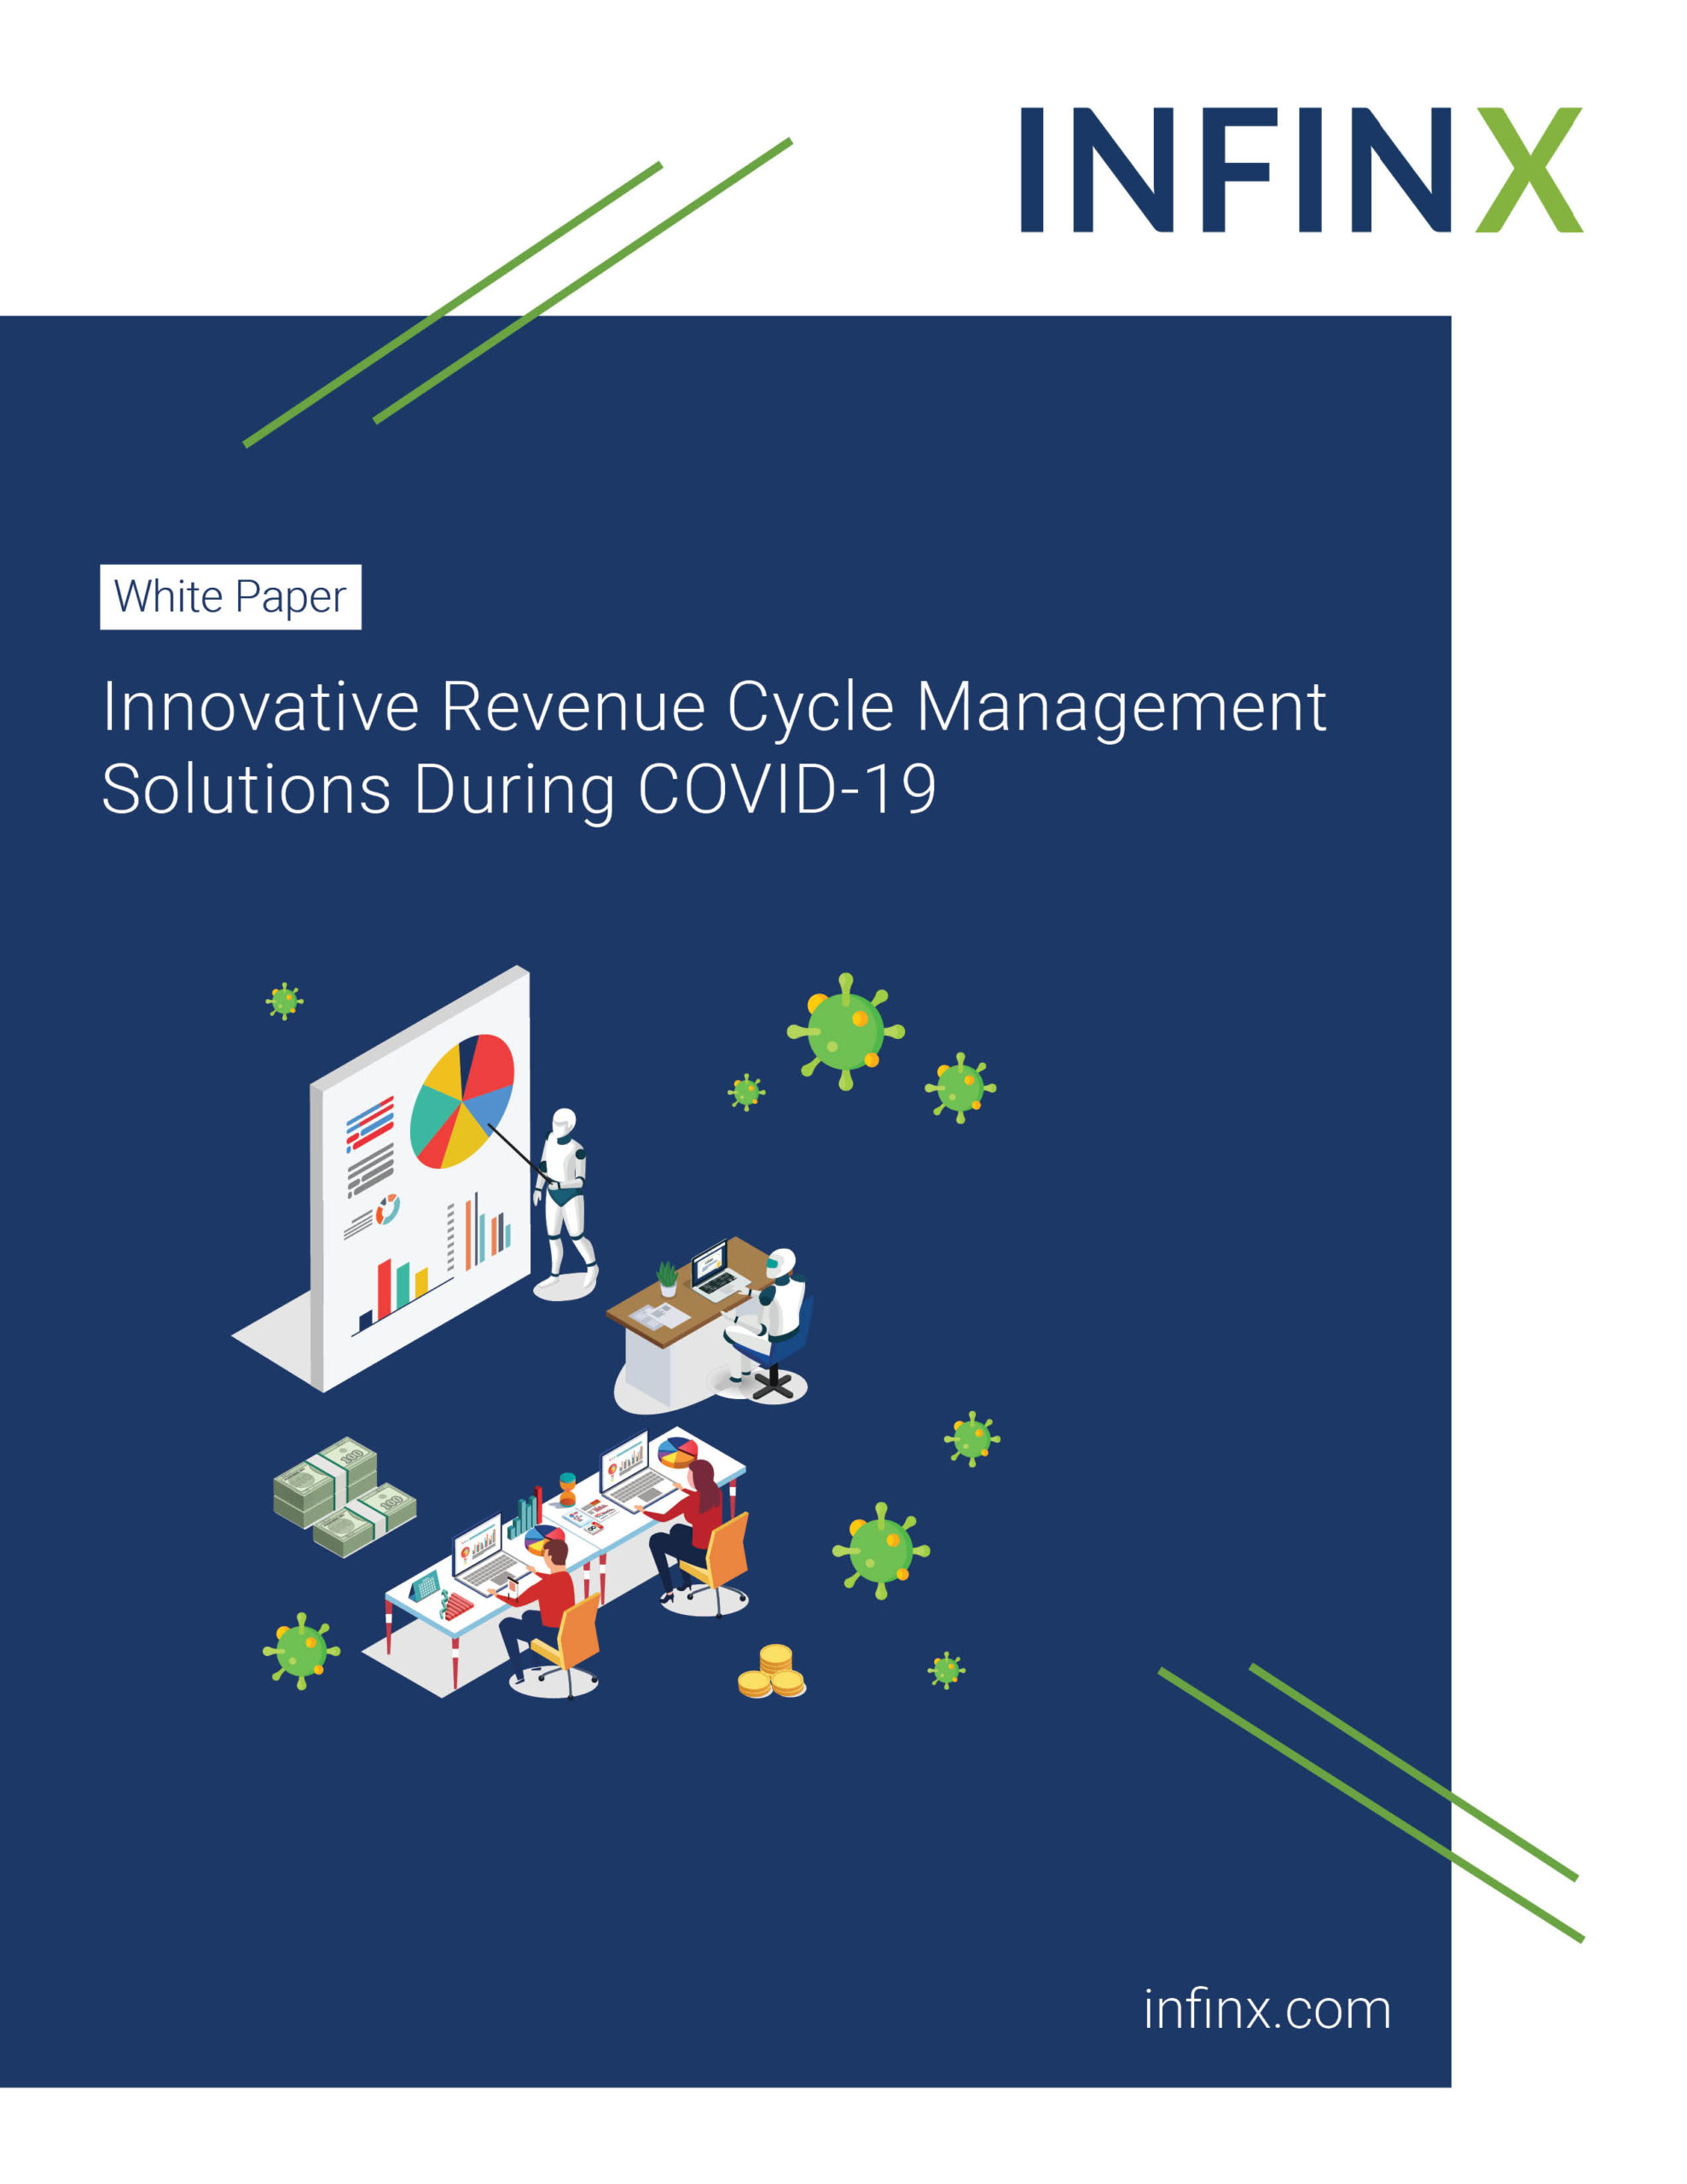 Infinx - White Paper - Innovative Revenue Cycle Management Solutions During COVID-19 June2021 1